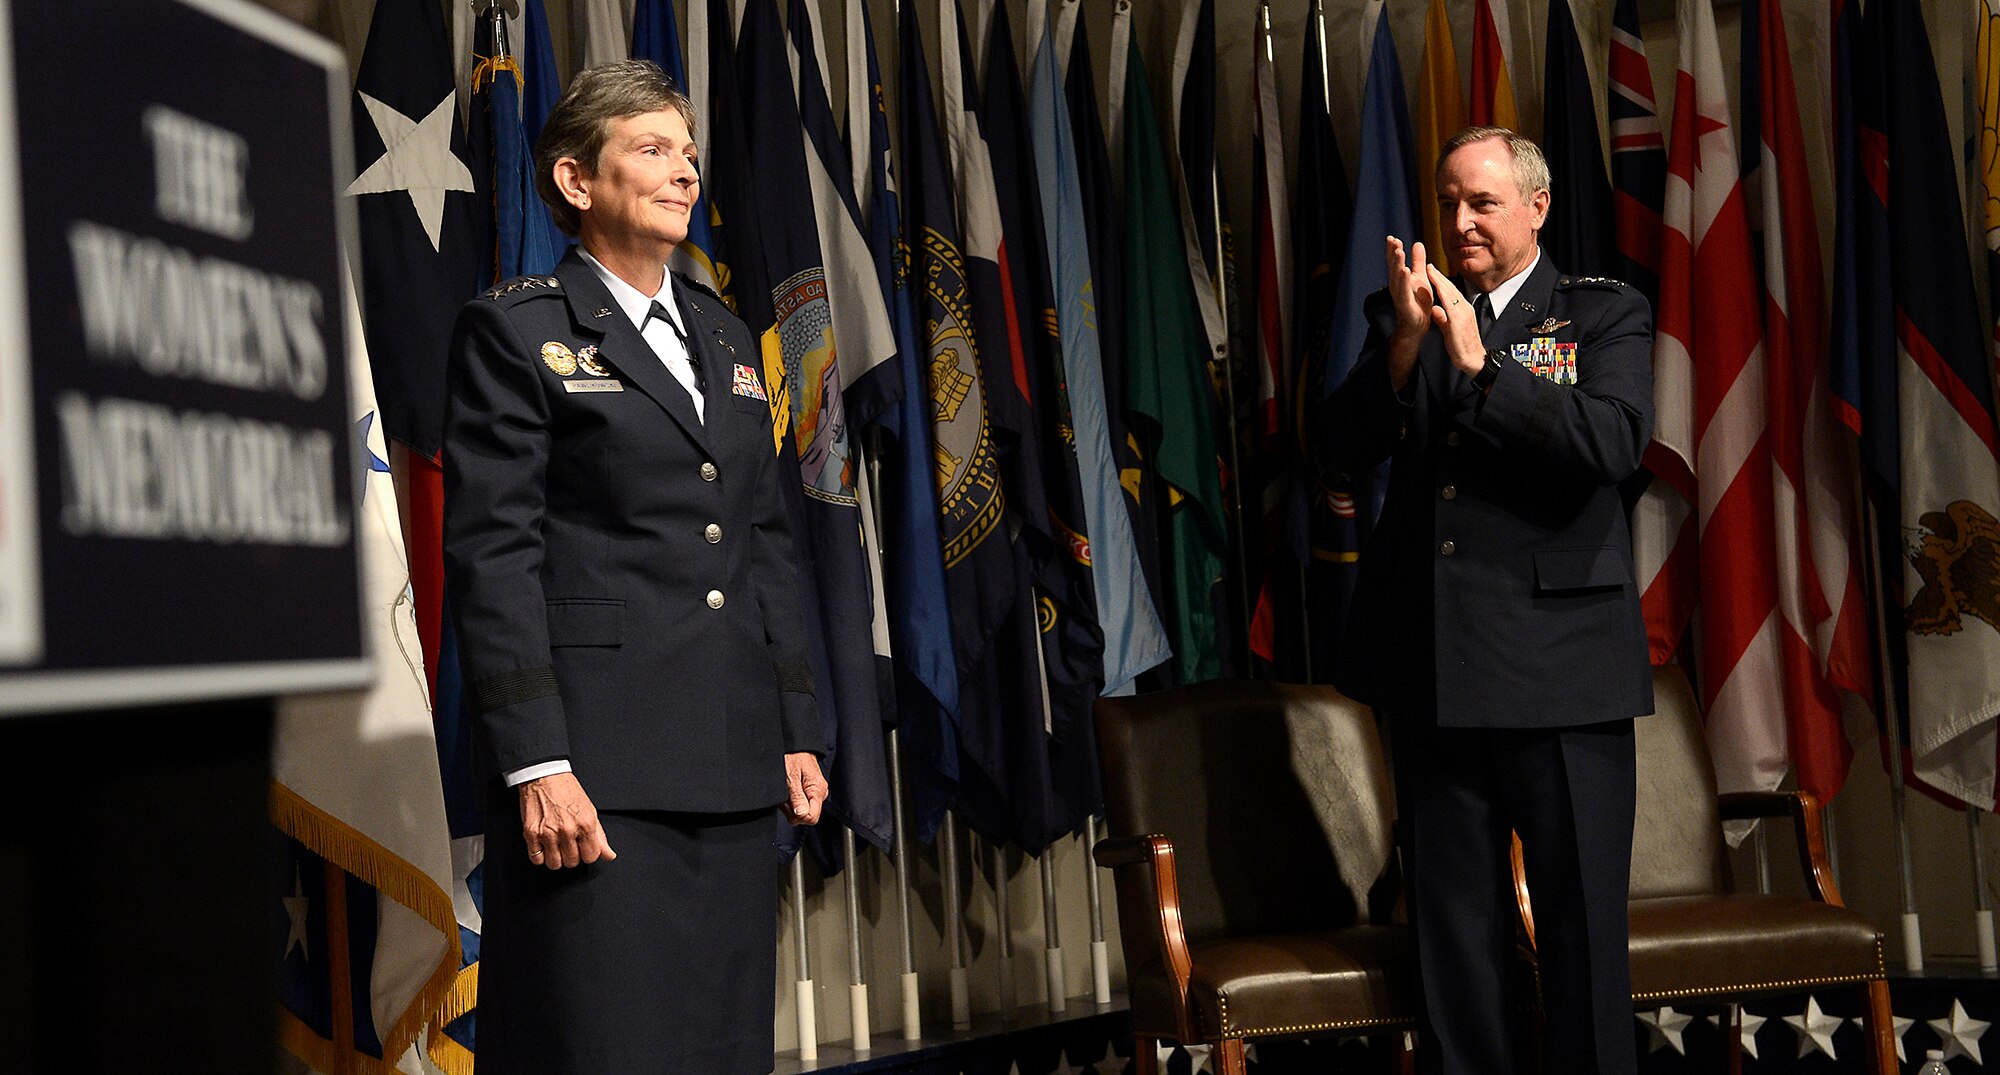 Air Force Chief of Staff Gen. Mark A. Welsh III congratulates newly promoted Gen. Ellen M. Pawlikowski during her promotion ceremony June 1, 2015, at the Women's Memorial for Military Service in Arlington National Cemetery, Virginia. Pawlikowski is slated to become the commander of Air Force Materiel Command at Wright-Patterson Air Force Base, Ohio. (U.S. Air Force photo/Scott M. Ash)